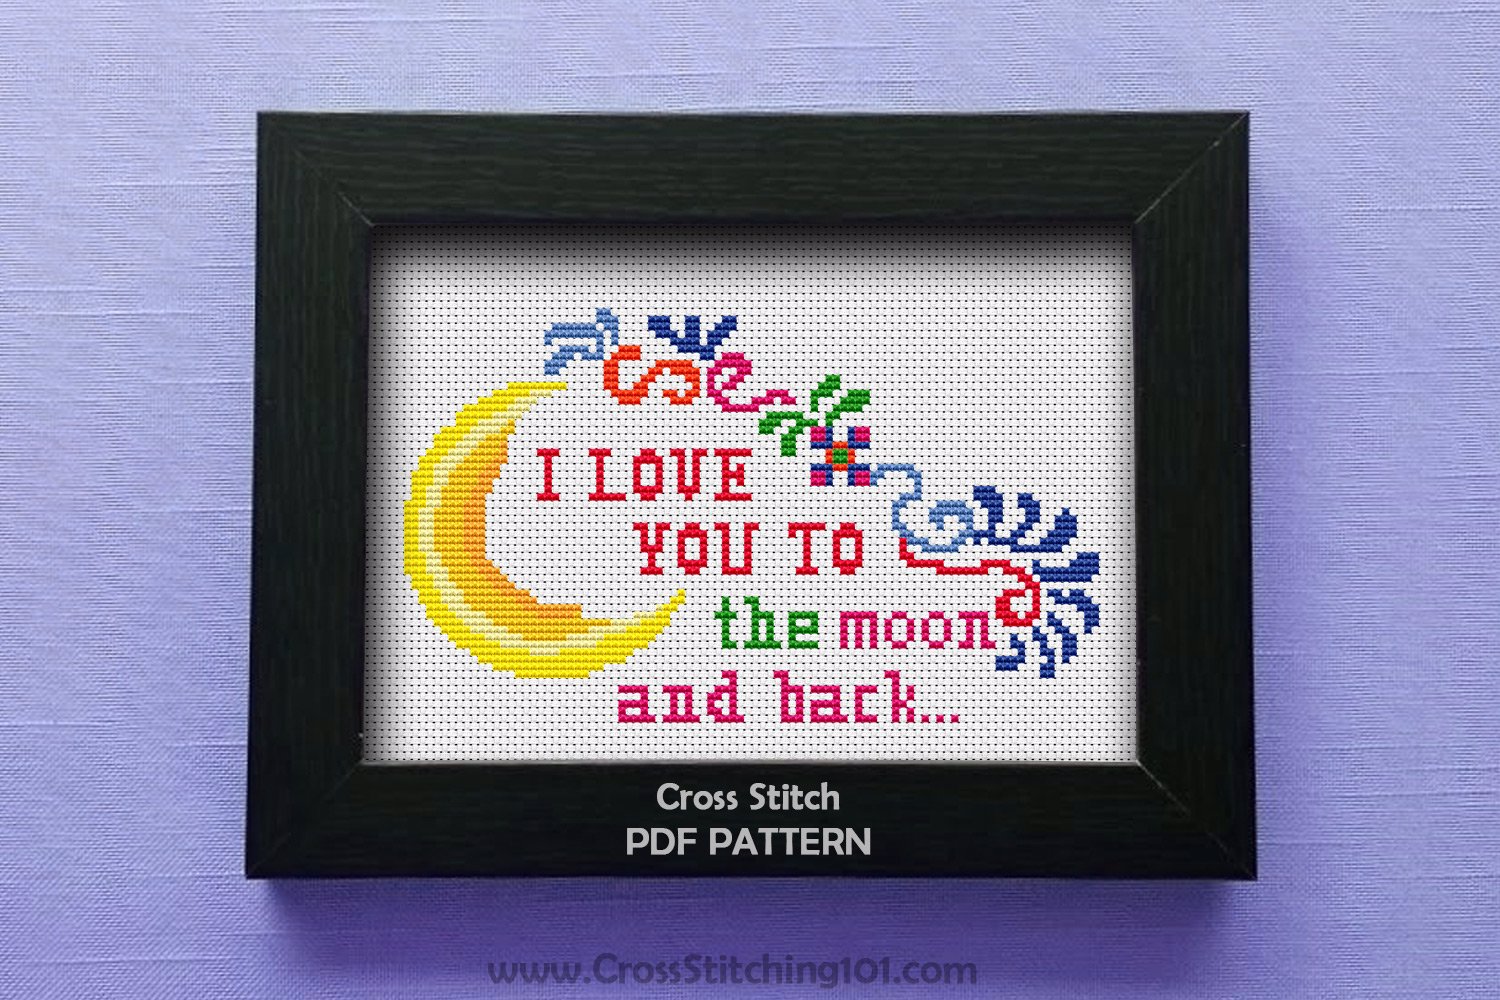 I Love you to the moon and back - Moon with Swirl Designs Cross Stitch Design